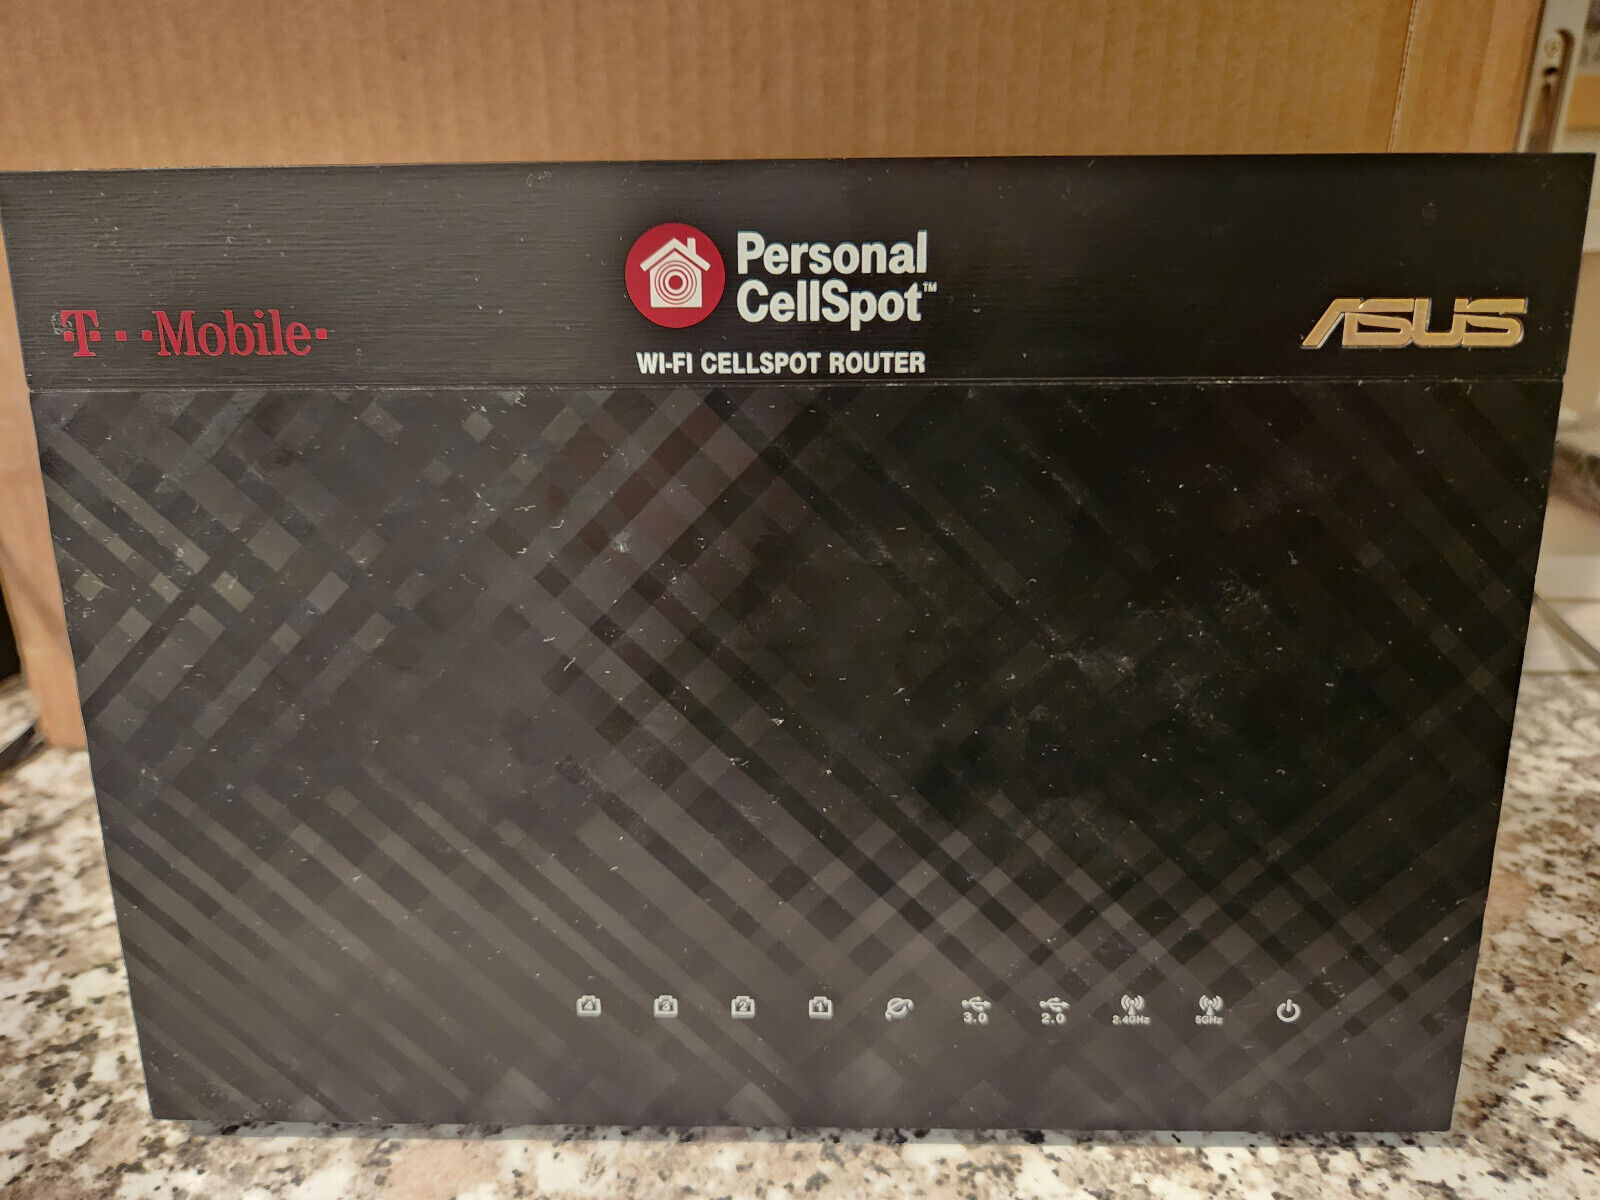 T-Mobile TM-AC1900 (Asus RT-AC68U) Dual Band Wireless Router